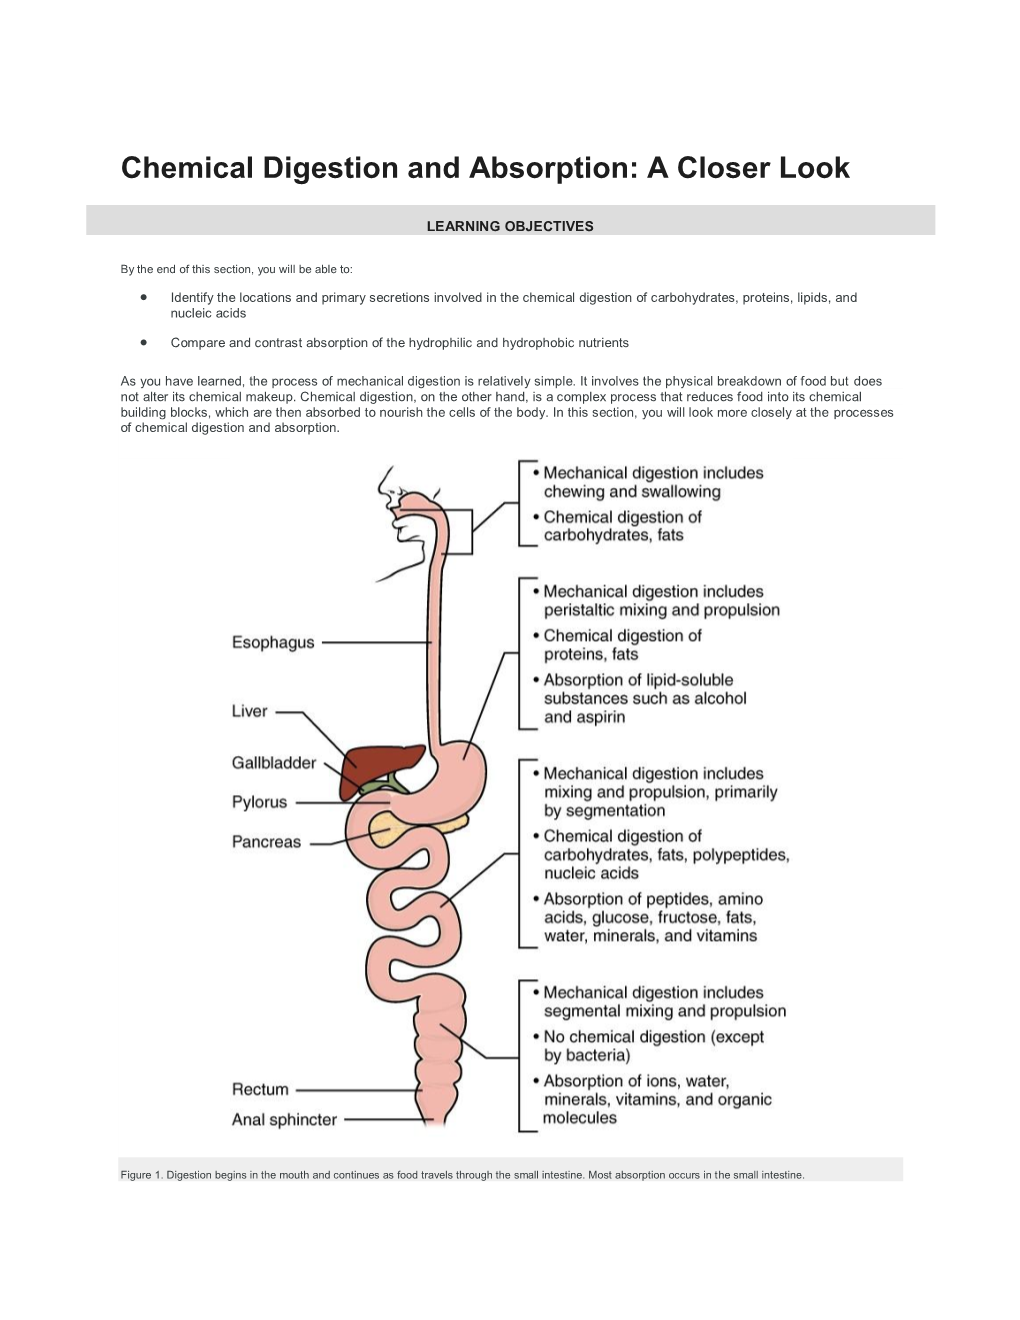 Chemical Digestion and Absorption: a Closer Look